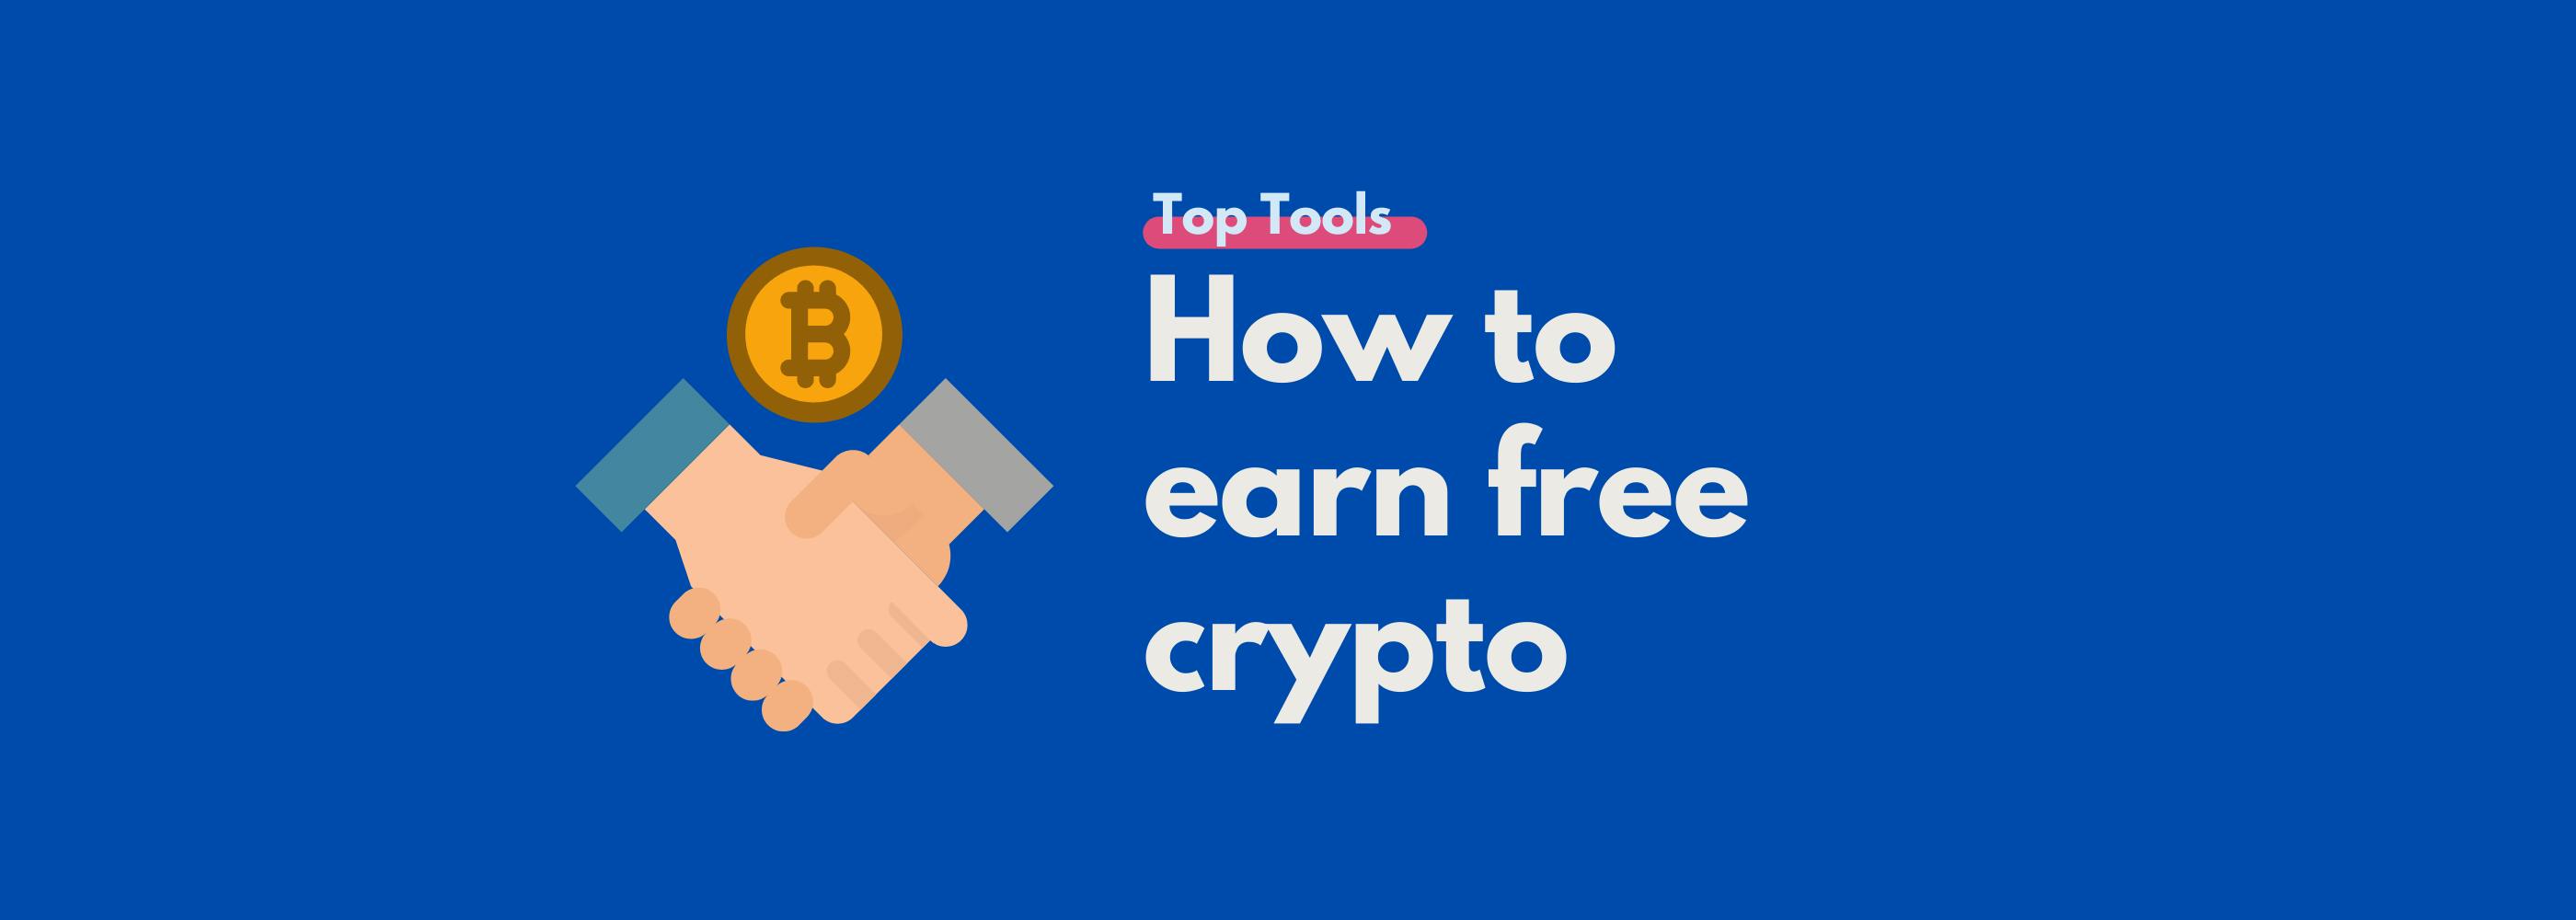 How to earn cryptocurrency 